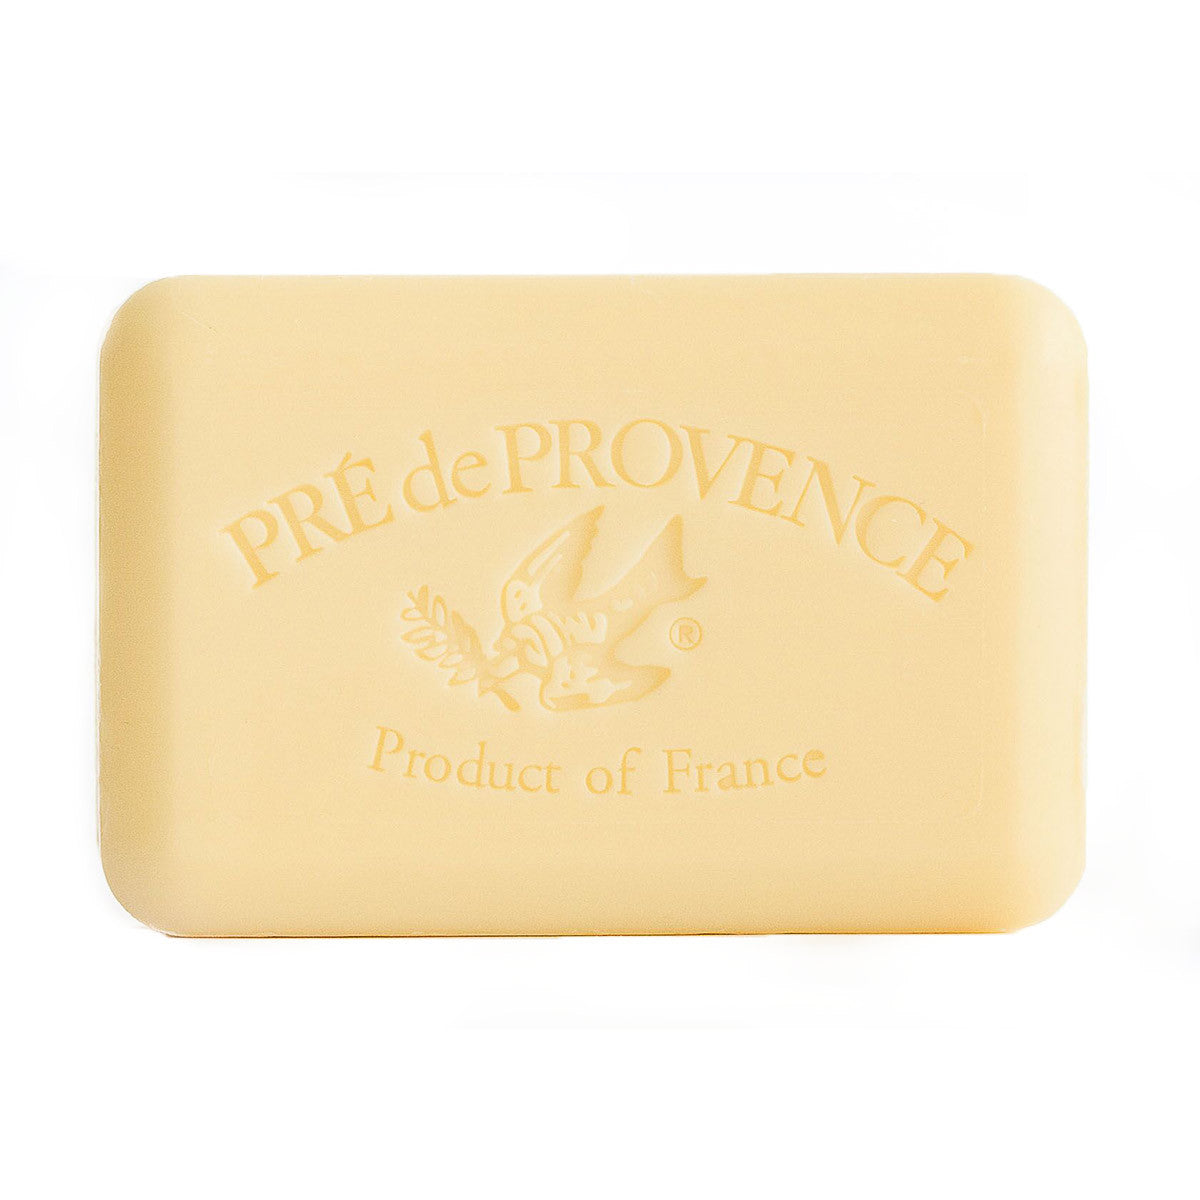 Primary image of Agrumes Soap Bar